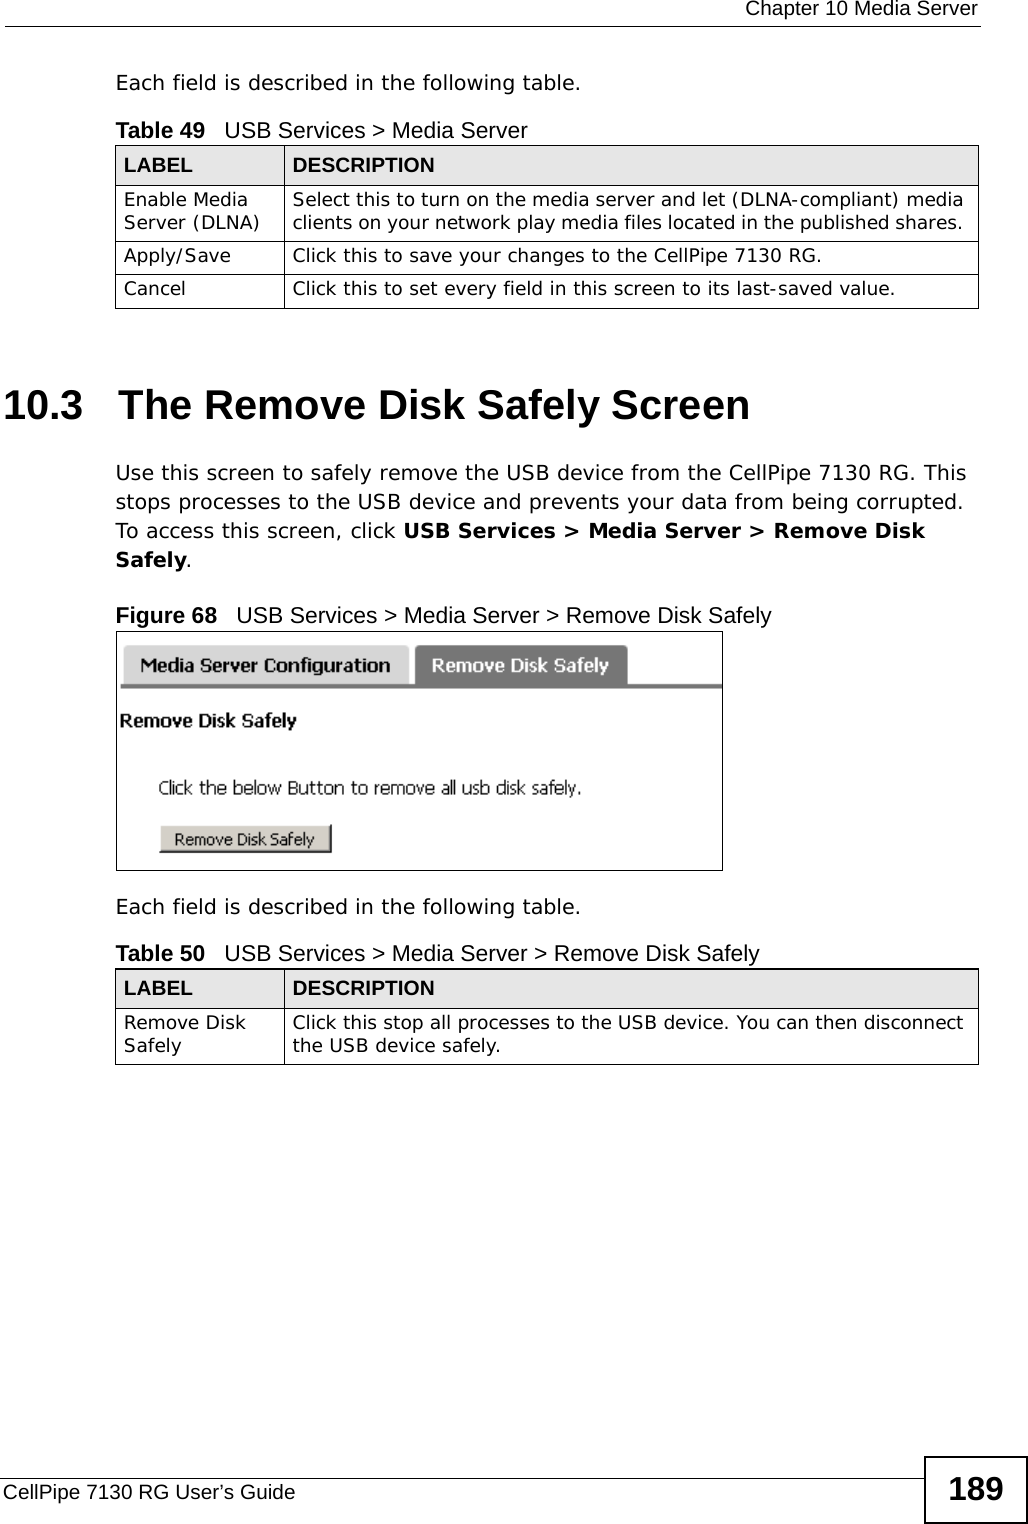  Chapter 10 Media ServerCellPipe 7130 RG User’s Guide 189Each field is described in the following table.10.3   The Remove Disk Safely ScreenUse this screen to safely remove the USB device from the CellPipe 7130 RG. This stops processes to the USB device and prevents your data from being corrupted. To access this screen, click USB Services &gt; Media Server &gt; Remove Disk Safely.Figure 68   USB Services &gt; Media Server &gt; Remove Disk SafelyEach field is described in the following table.Table 49   USB Services &gt; Media ServerLABEL DESCRIPTIONEnable Media Server (DLNA) Select this to turn on the media server and let (DLNA-compliant) media clients on your network play media files located in the published shares. Apply/Save Click this to save your changes to the CellPipe 7130 RG.Cancel Click this to set every field in this screen to its last-saved value.Table 50   USB Services &gt; Media Server &gt; Remove Disk SafelyLABEL DESCRIPTIONRemove Disk Safely Click this stop all processes to the USB device. You can then disconnect the USB device safely.